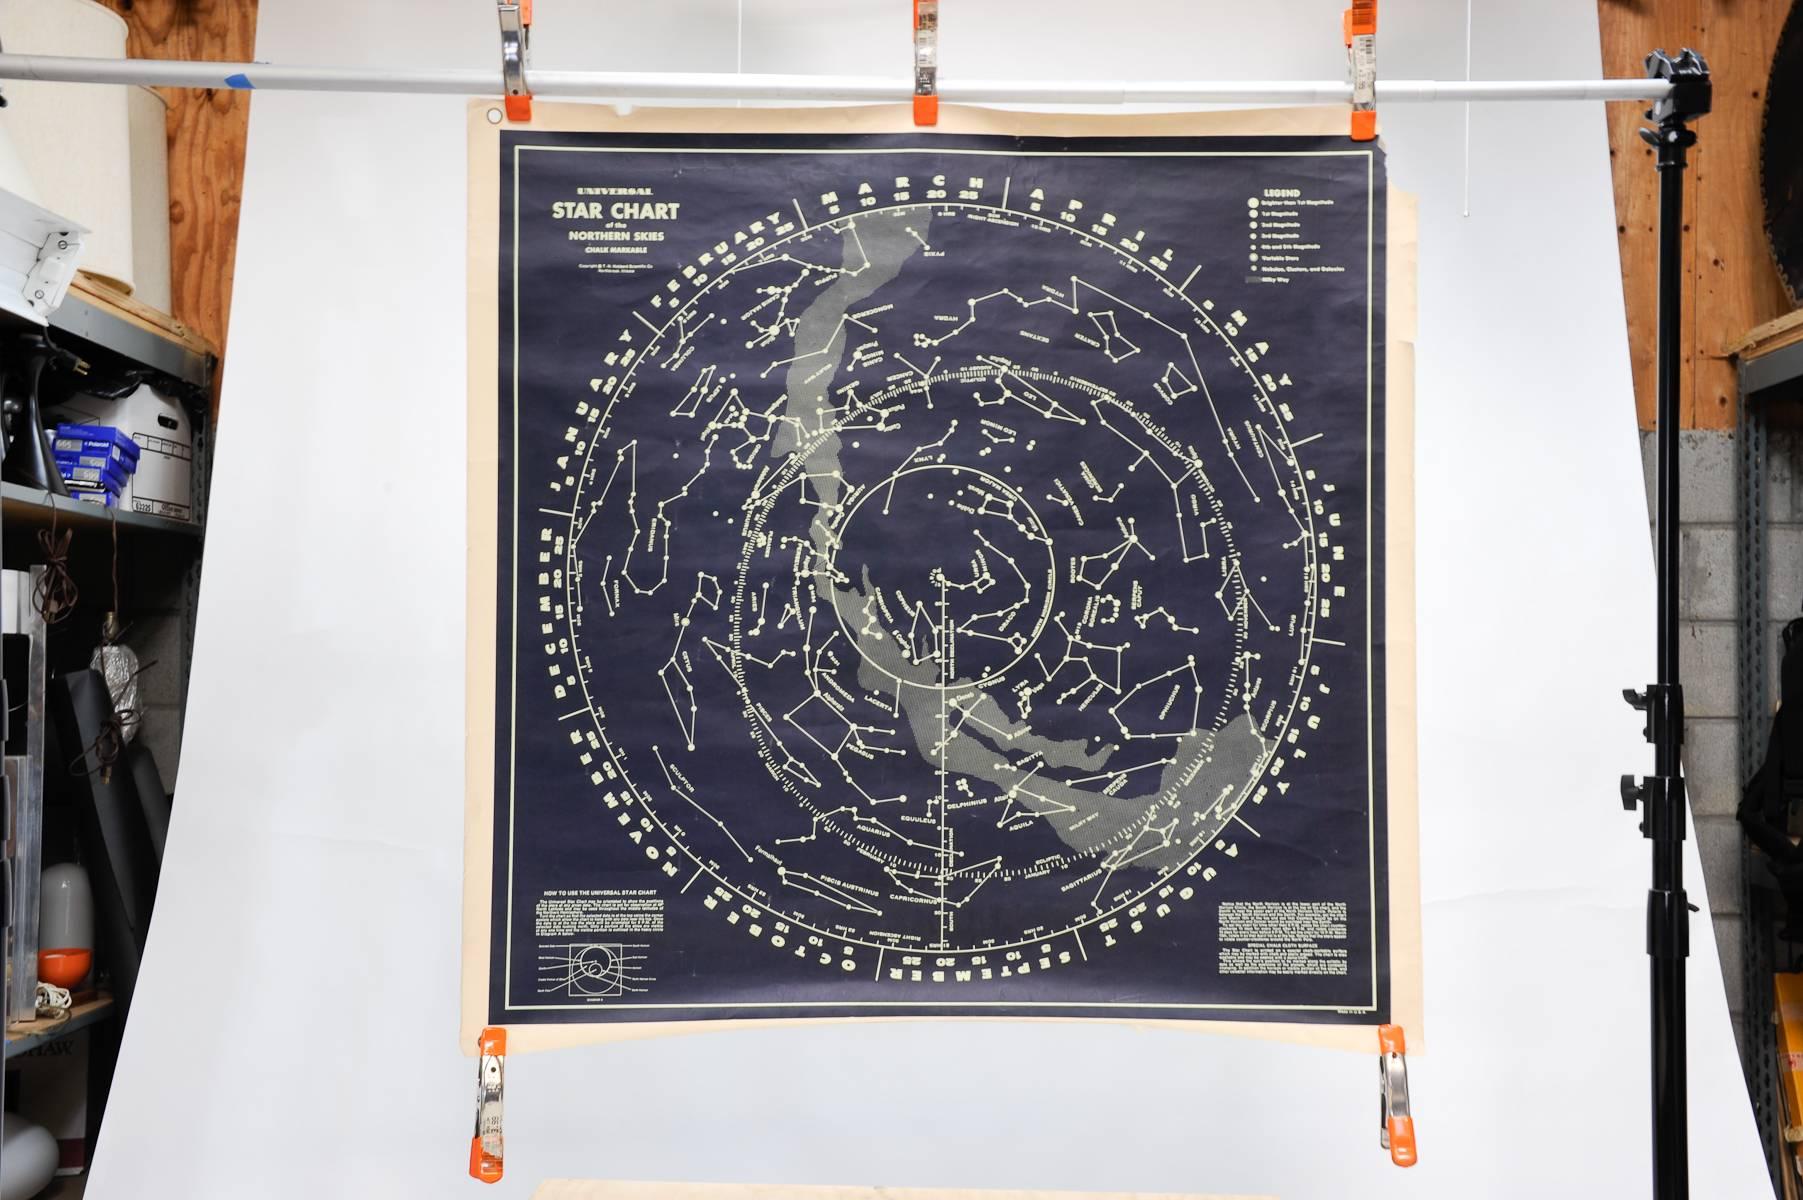 A wonderful vintage star map. The map is chalkable but better to be hung in a home for decor. It can be frame so as no damage will show. A wonder to look at and explore the skies.